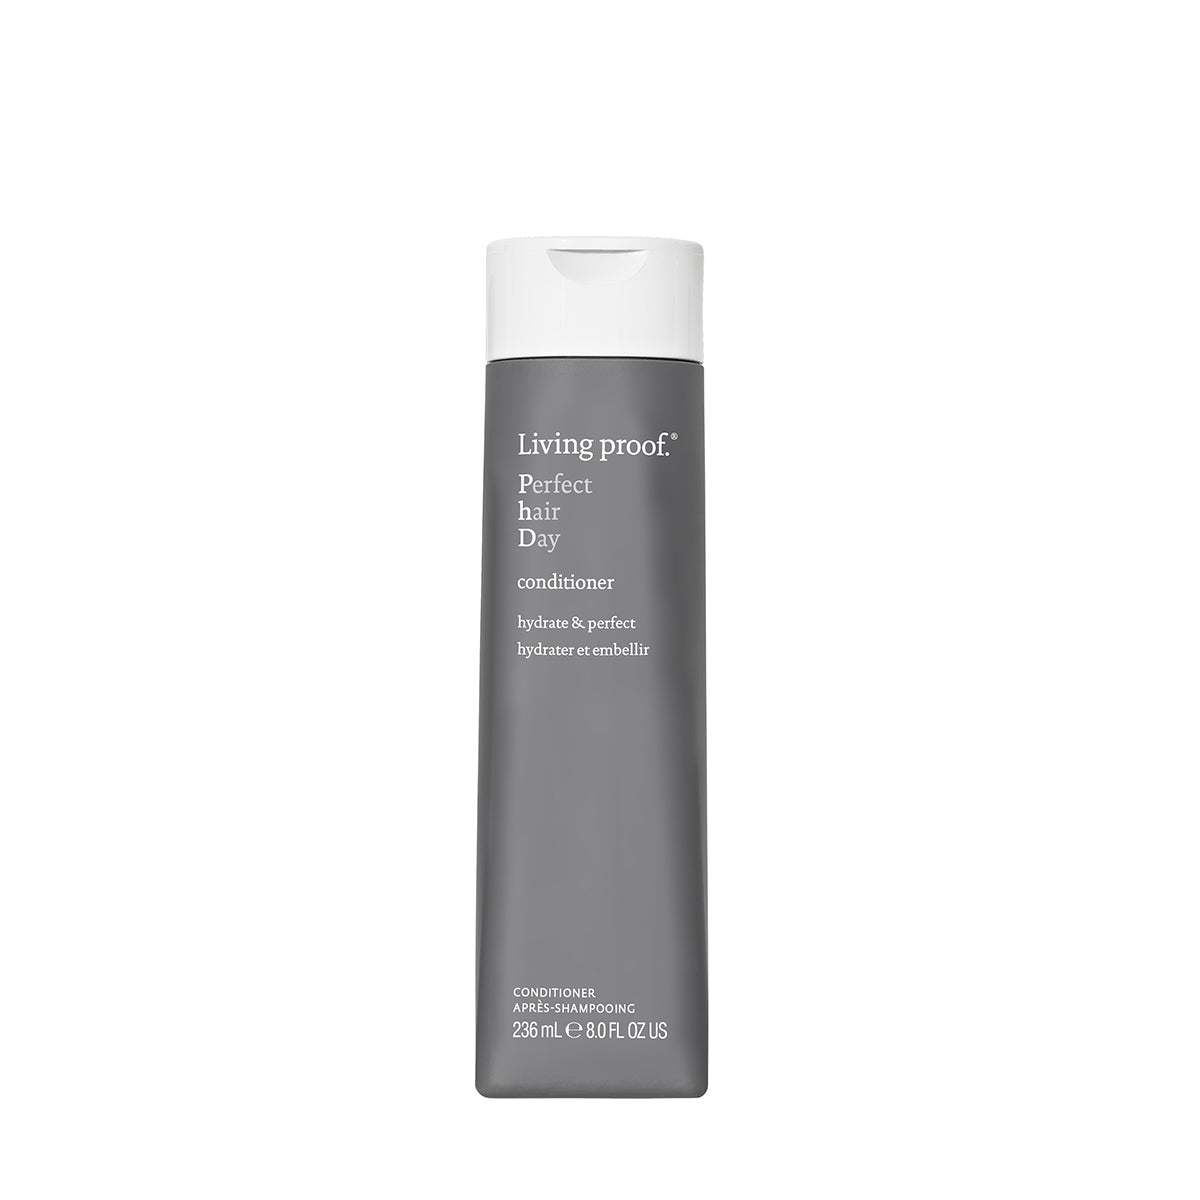 Living Proof Perfect Hair Day (PhD) Conditioner-236ml